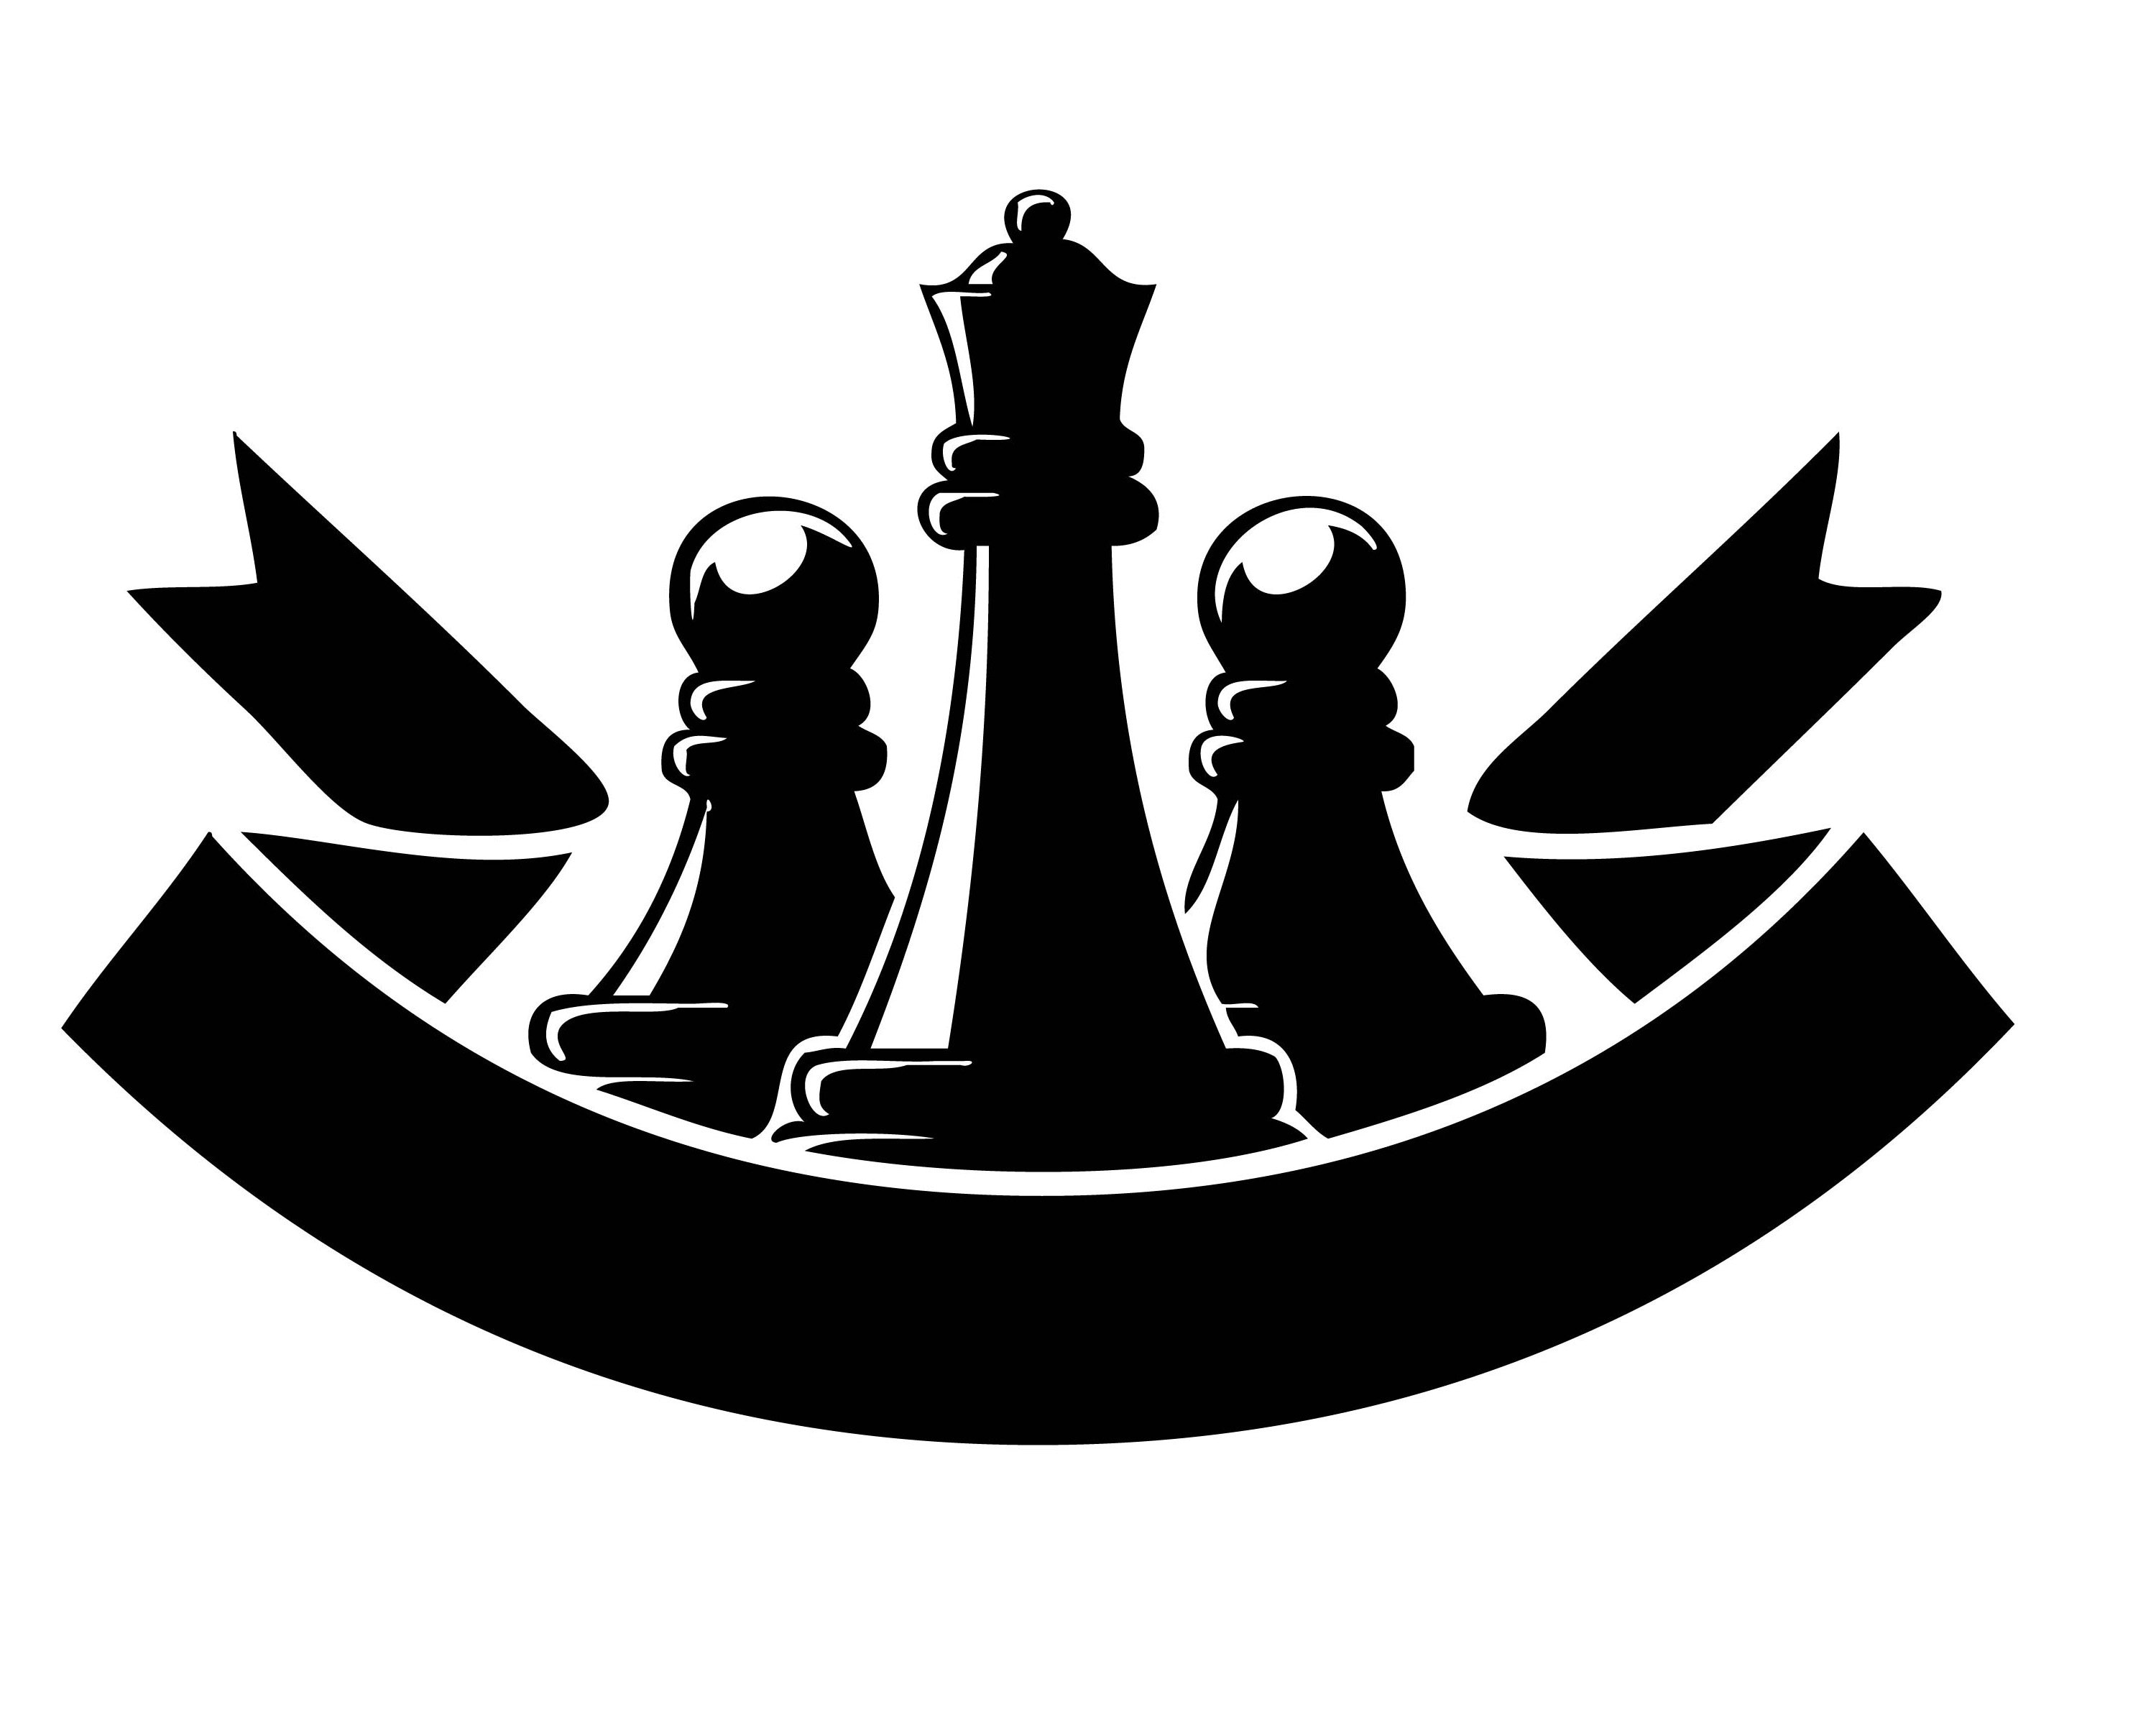 Black chess pieces with names Stock Vector